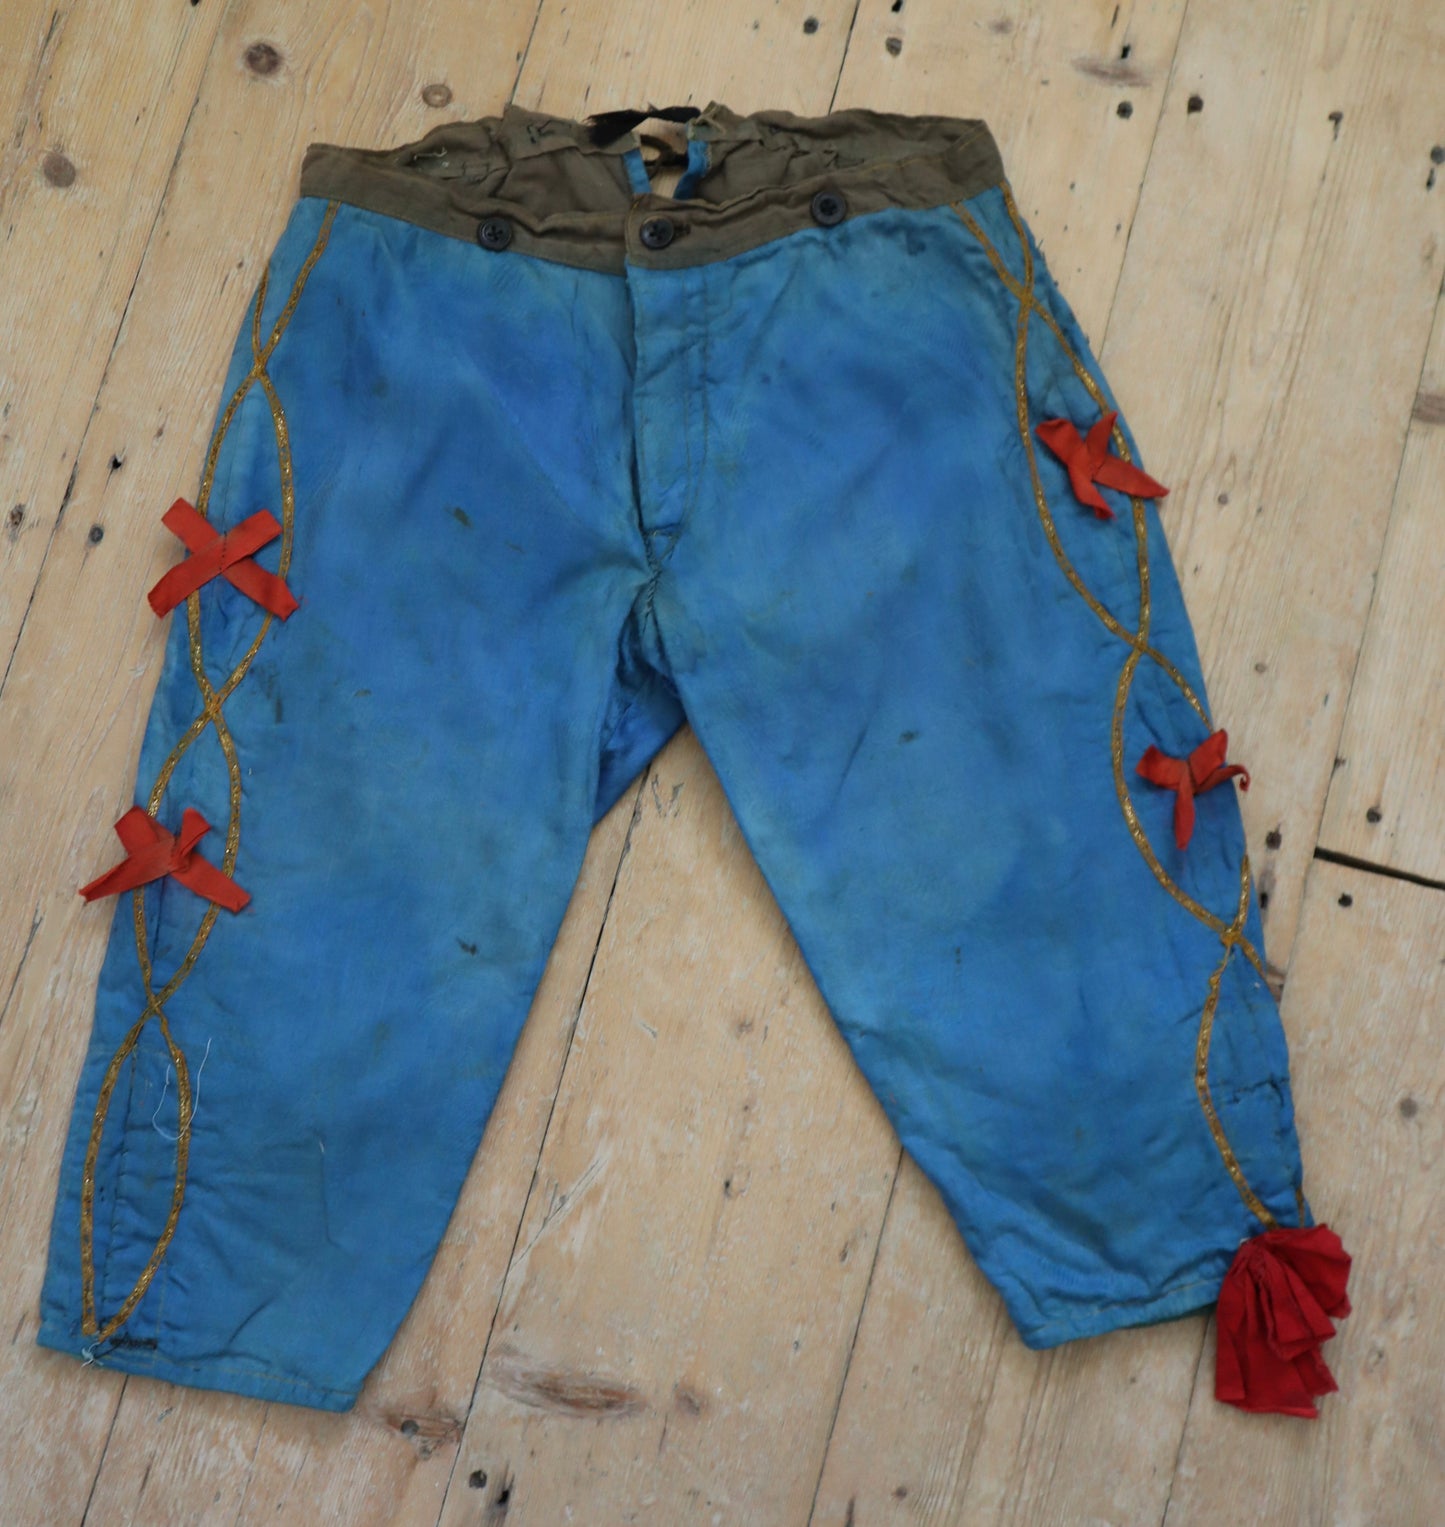 Antique French 19th Century Woven Cotton Blue Renaissance Style Breeches Trousers Pants Red Bows Gold Metal Ribbon Lace Trim Theatre Opera Costume Child’s